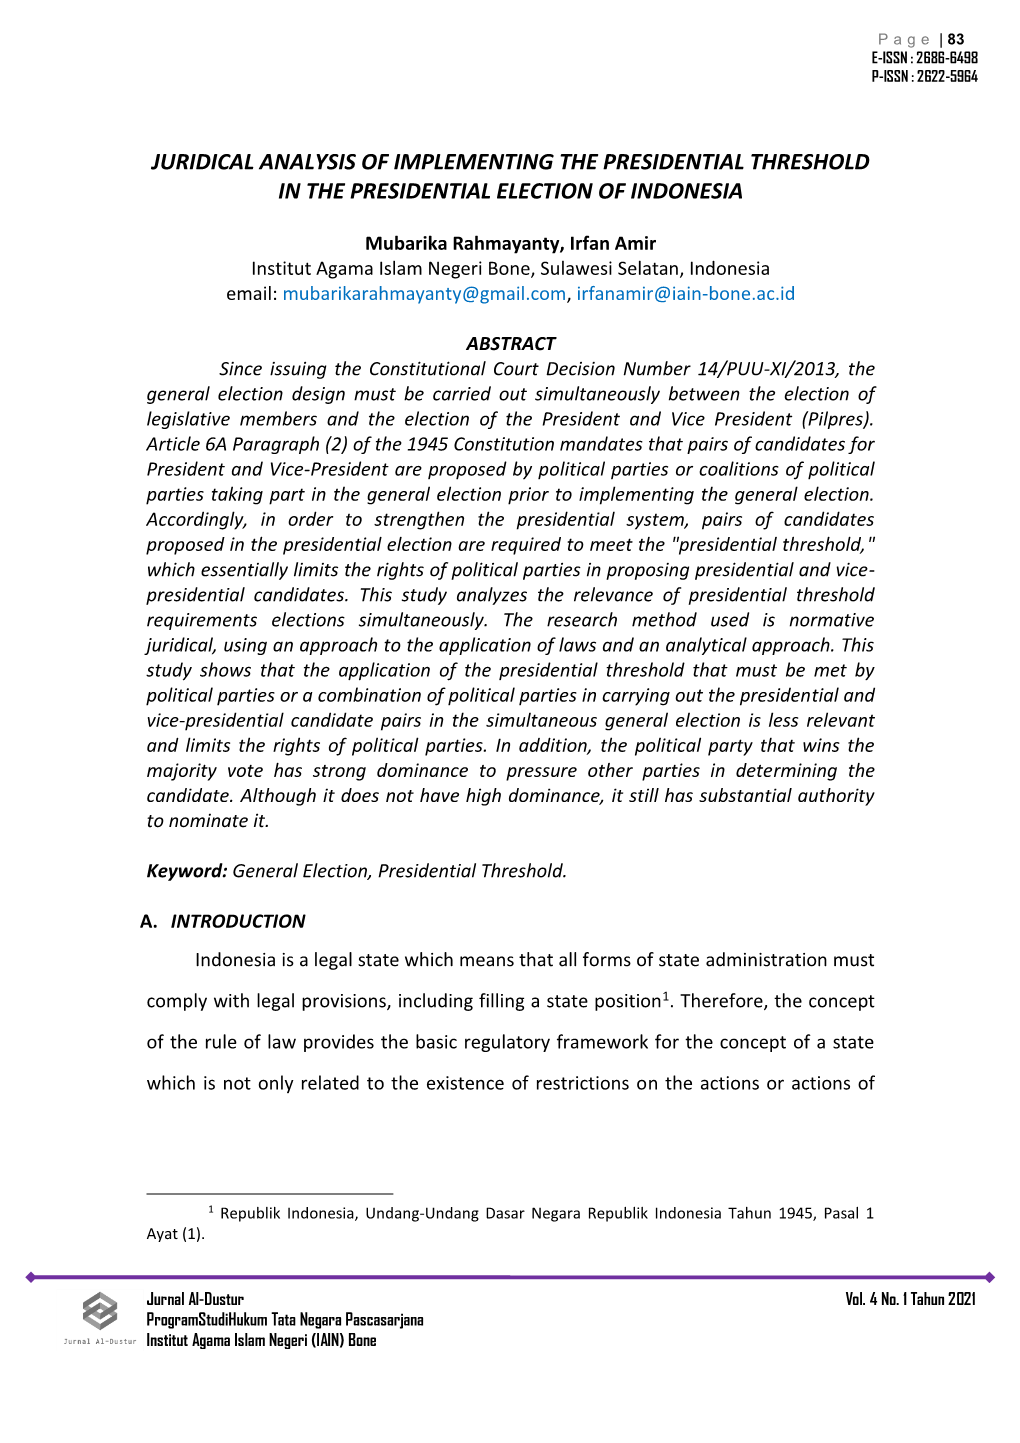 Juridical Analysis of Implementing the Presidential Threshold in the Presidential Election of Indonesia